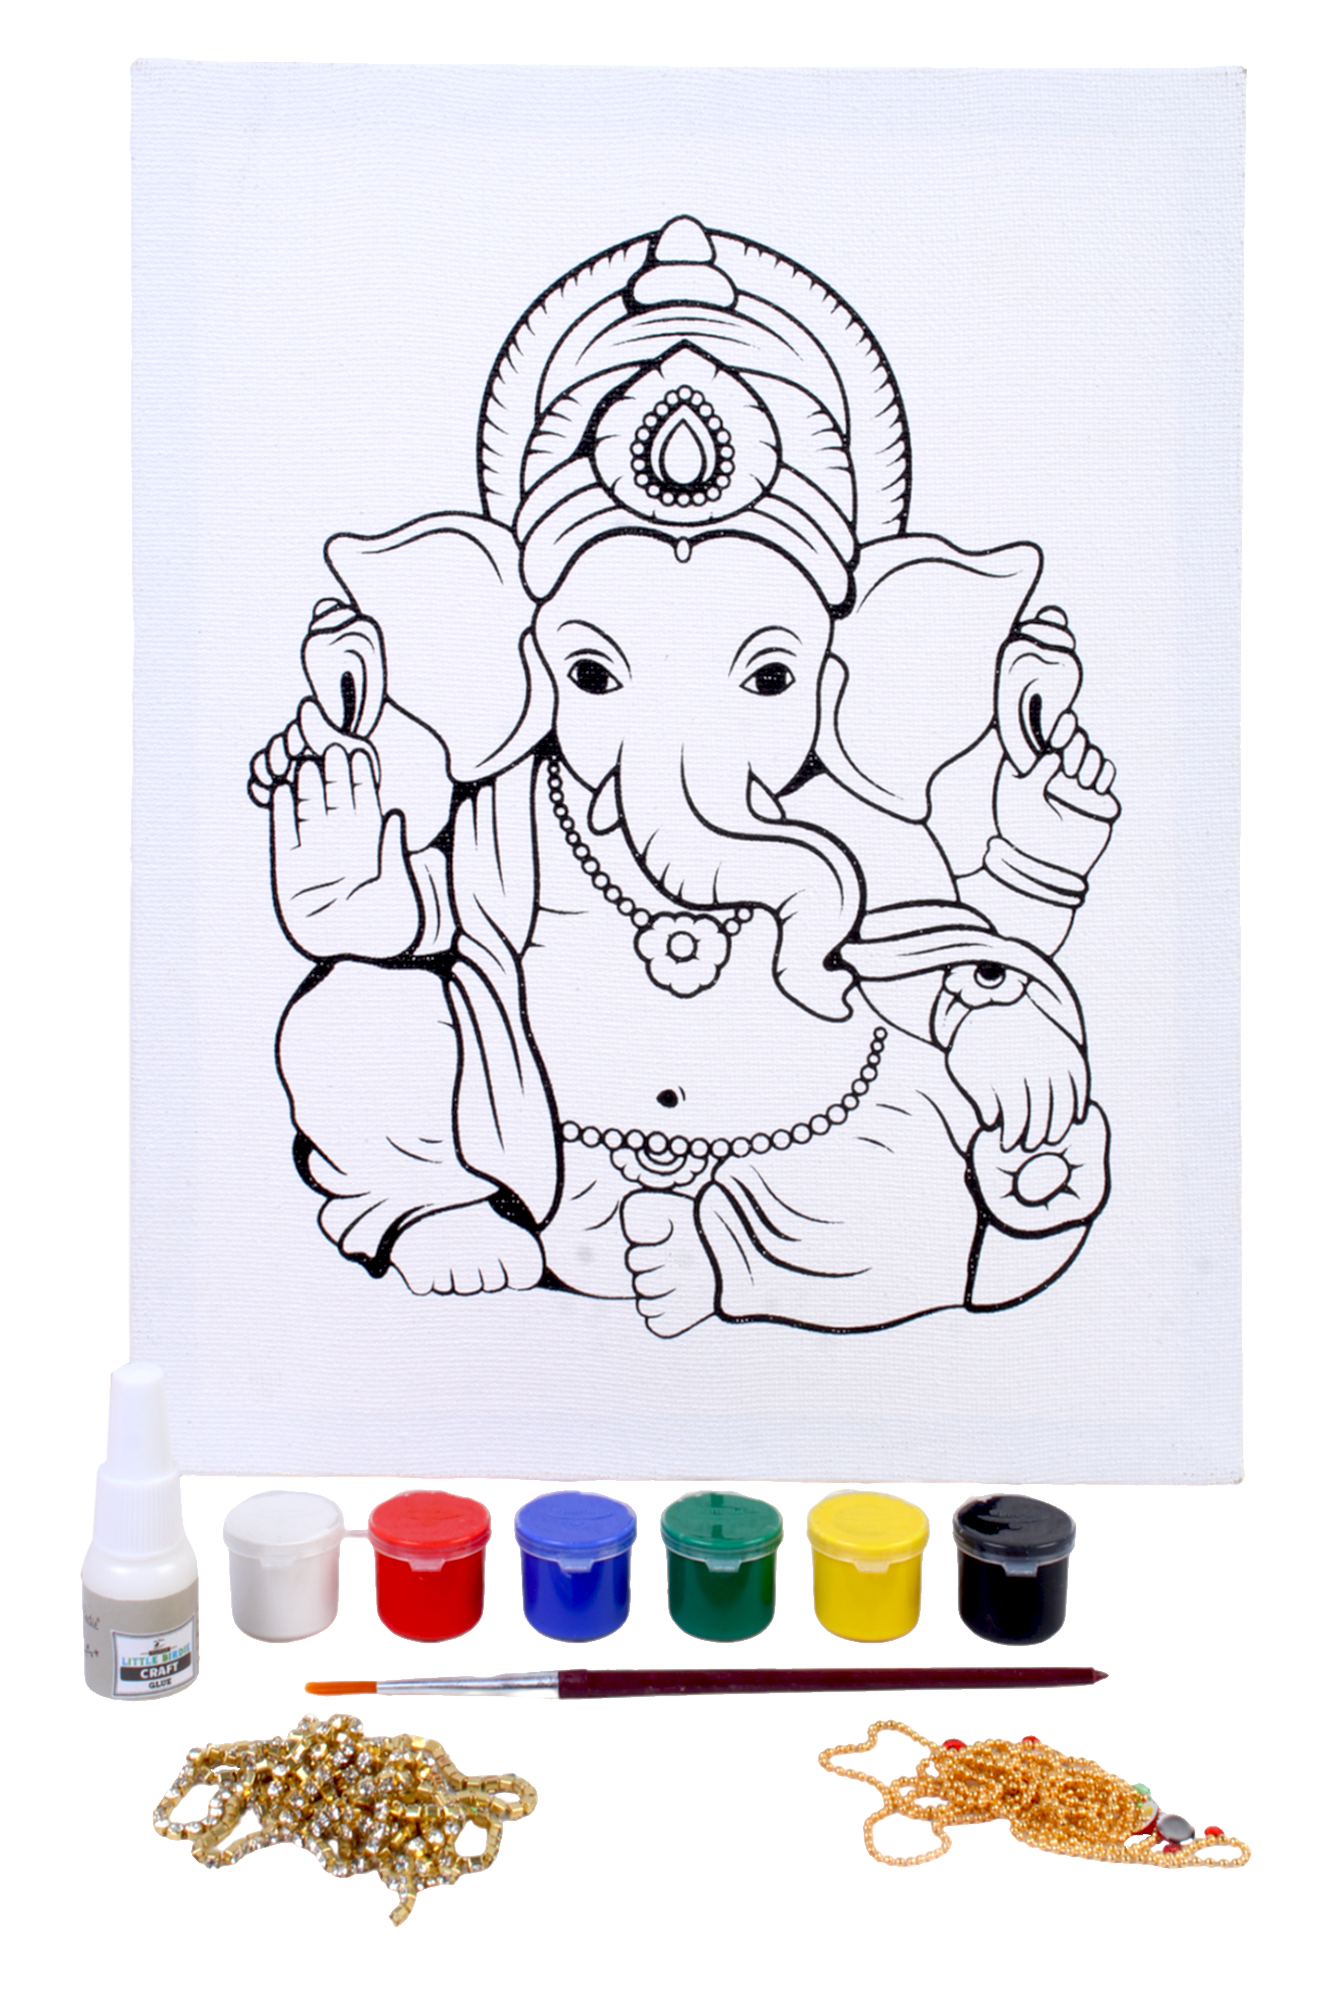 28 Collection Of Ganesh Chaturthi Drawing For Kids - Ganeshchaturthidrawing  Transparent PNG - 451x584 - Free Download on NicePNG